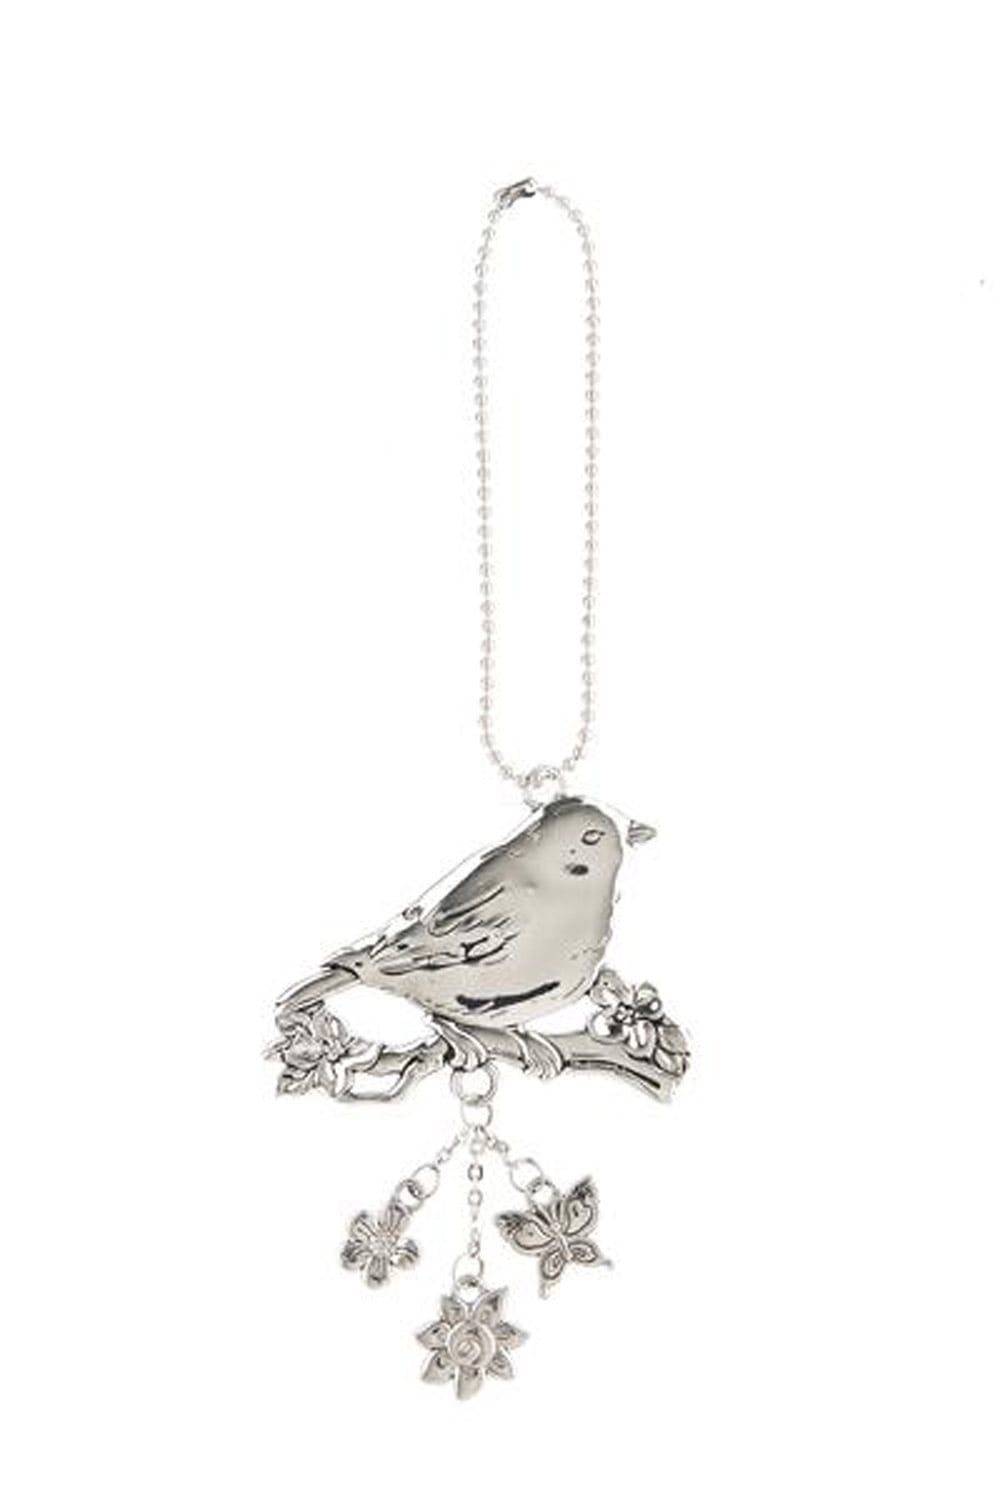 FIND BEAUTY IN EVERY DAY Metal Bird Ornament/Car Charm by Ganz 